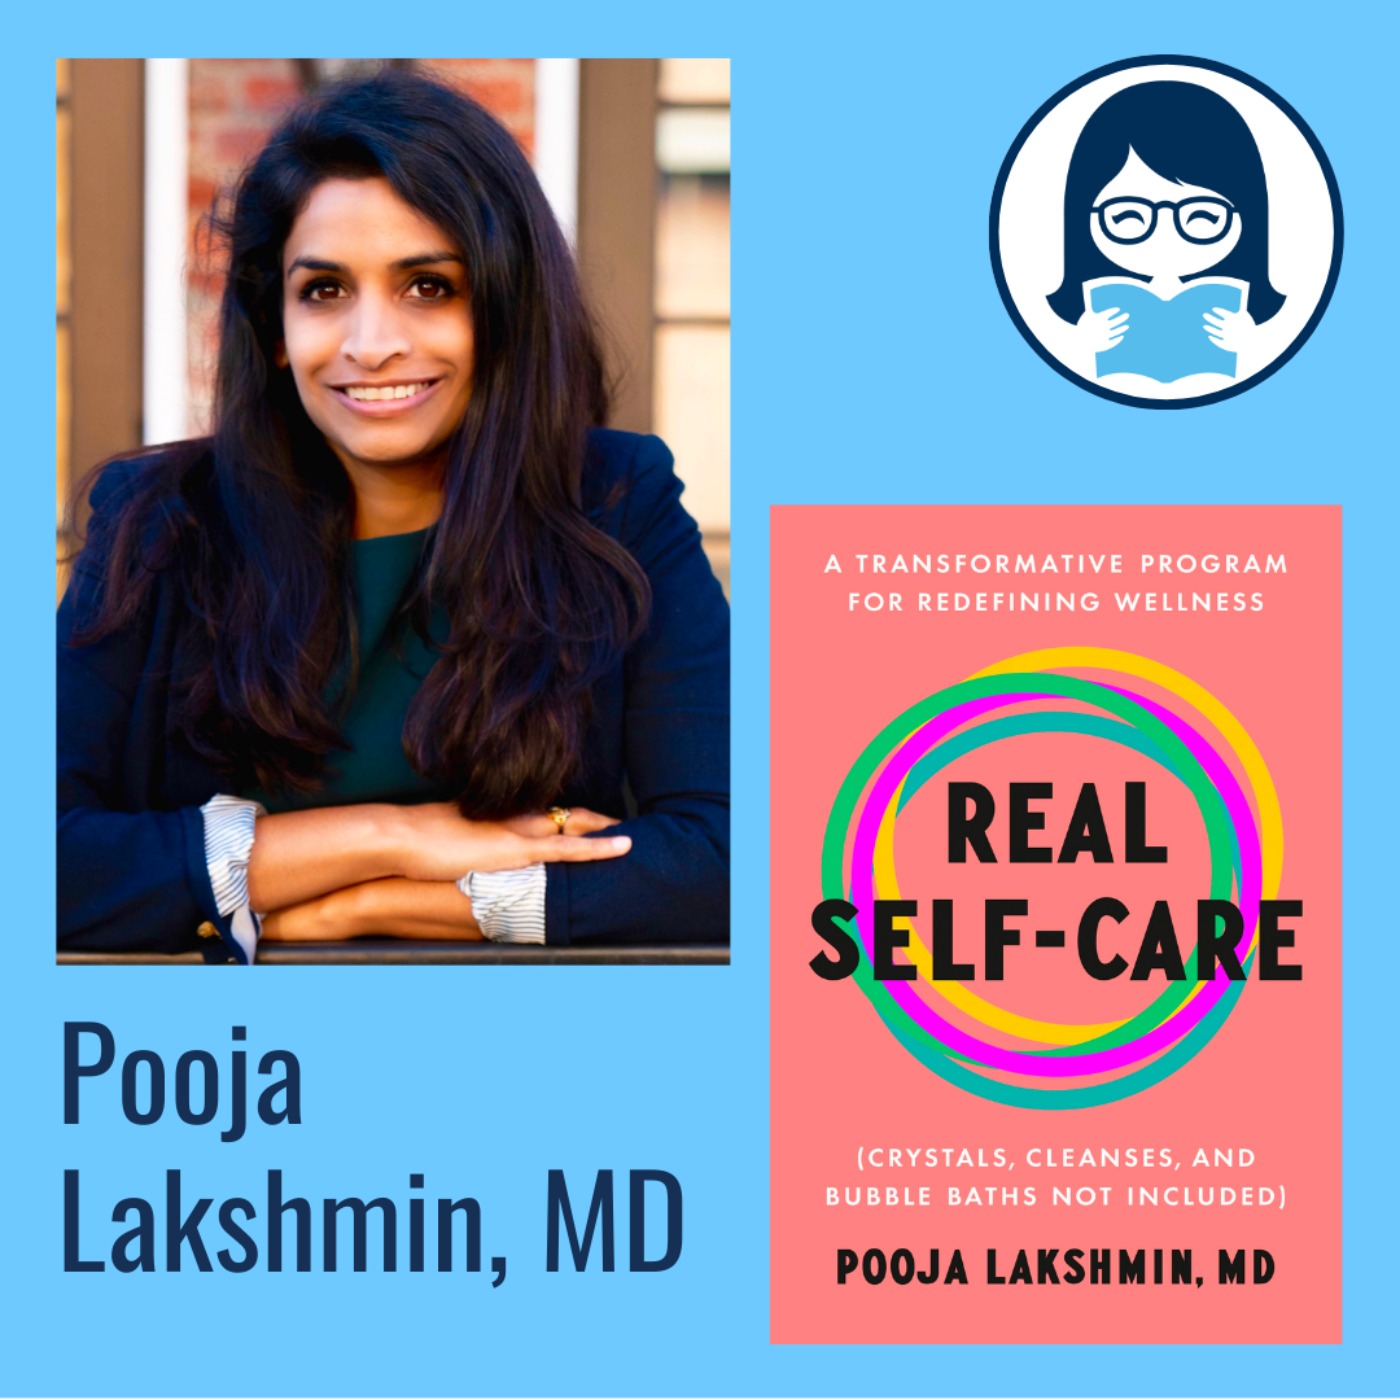 Pooja Lakshmin, REAL SELF-CARE: A Transformative Program for Redefining Wellness (Crystals, Cleanses, and Bubble Baths Not Included)